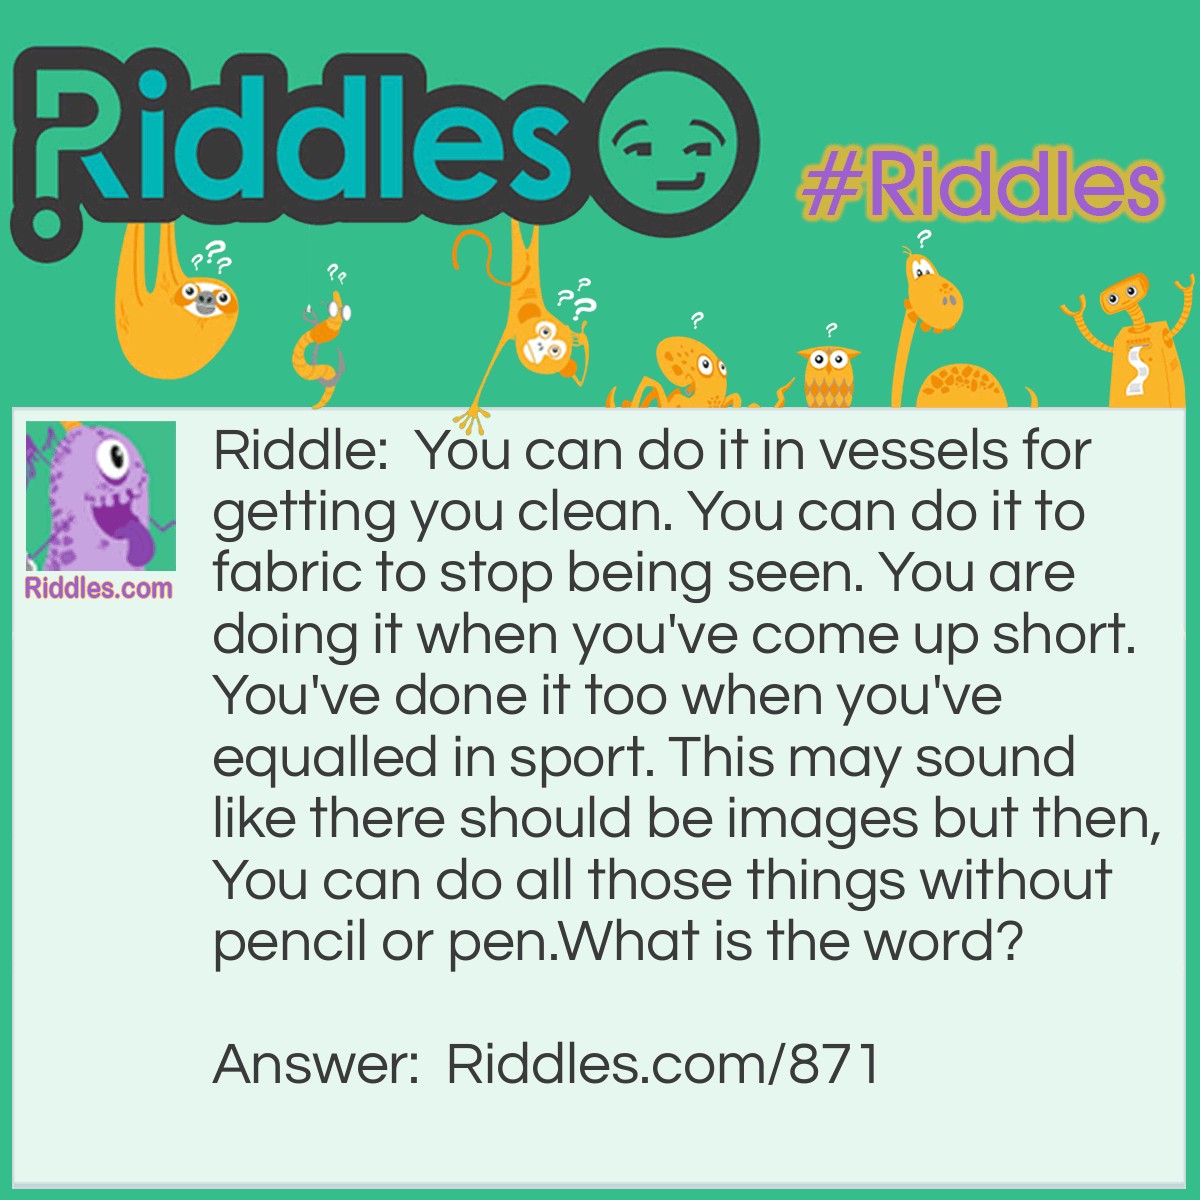 Riddle: You can do it in vessels for getting you clean. You can do it to fabric to stop being seen. You are doing it when you've come up short. You've done it too when you've equalled in sport. This may sound like there should be images but then, You can do all those things without pencil or pen.
What is the word? Answer: DRAW.